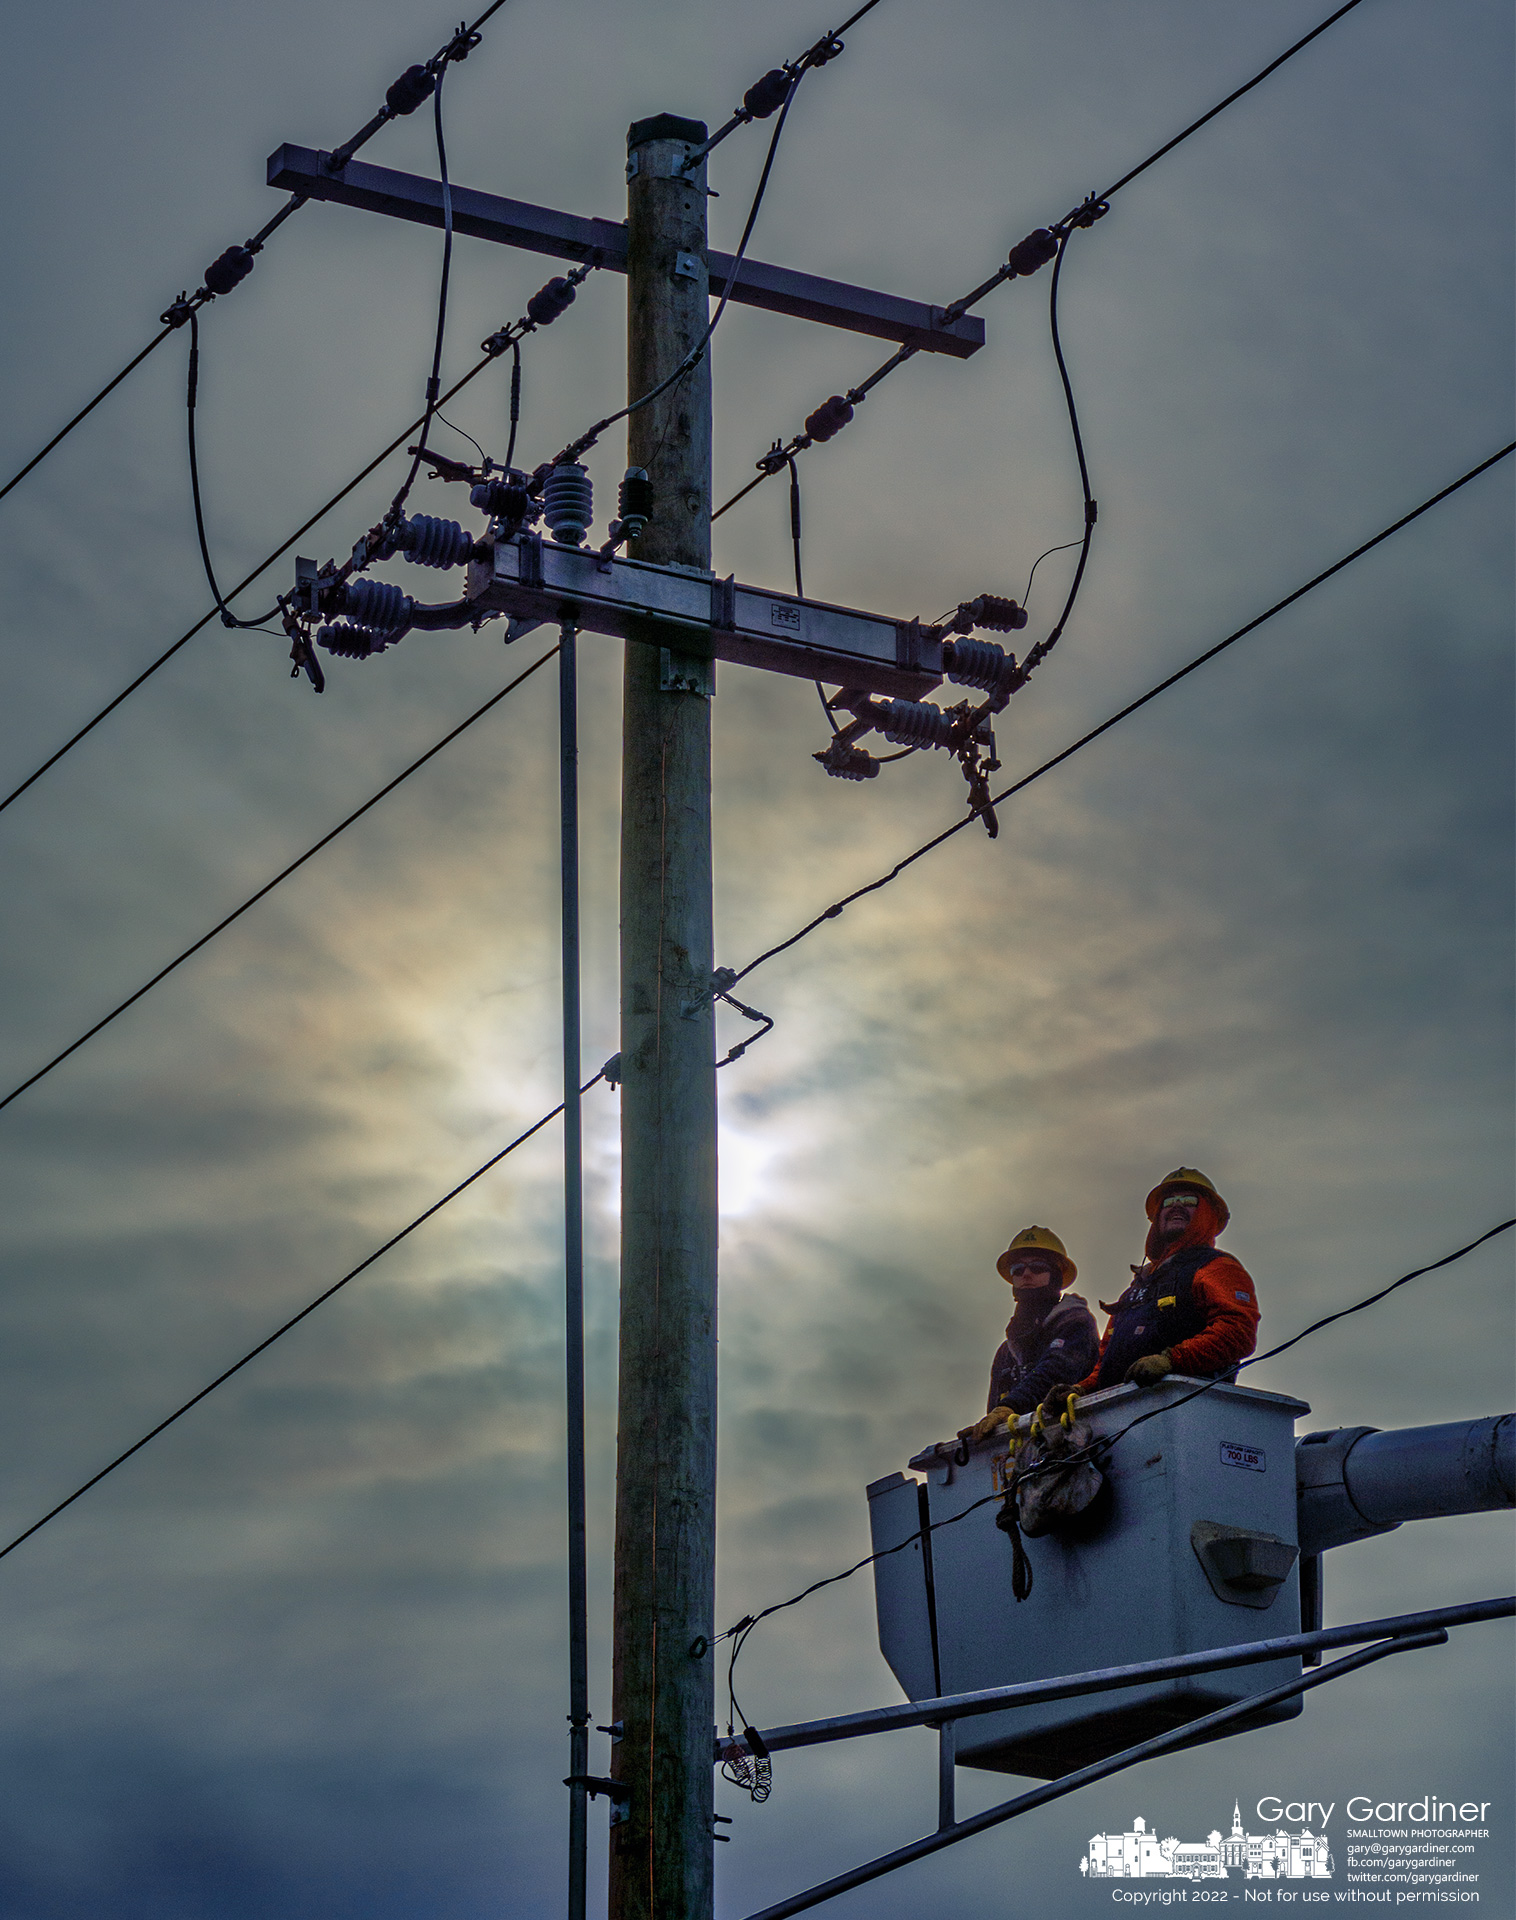 A city electric crew watches as switches are tested after the utility pole was replaced. My Final Photo for Jan. 19, 2022.